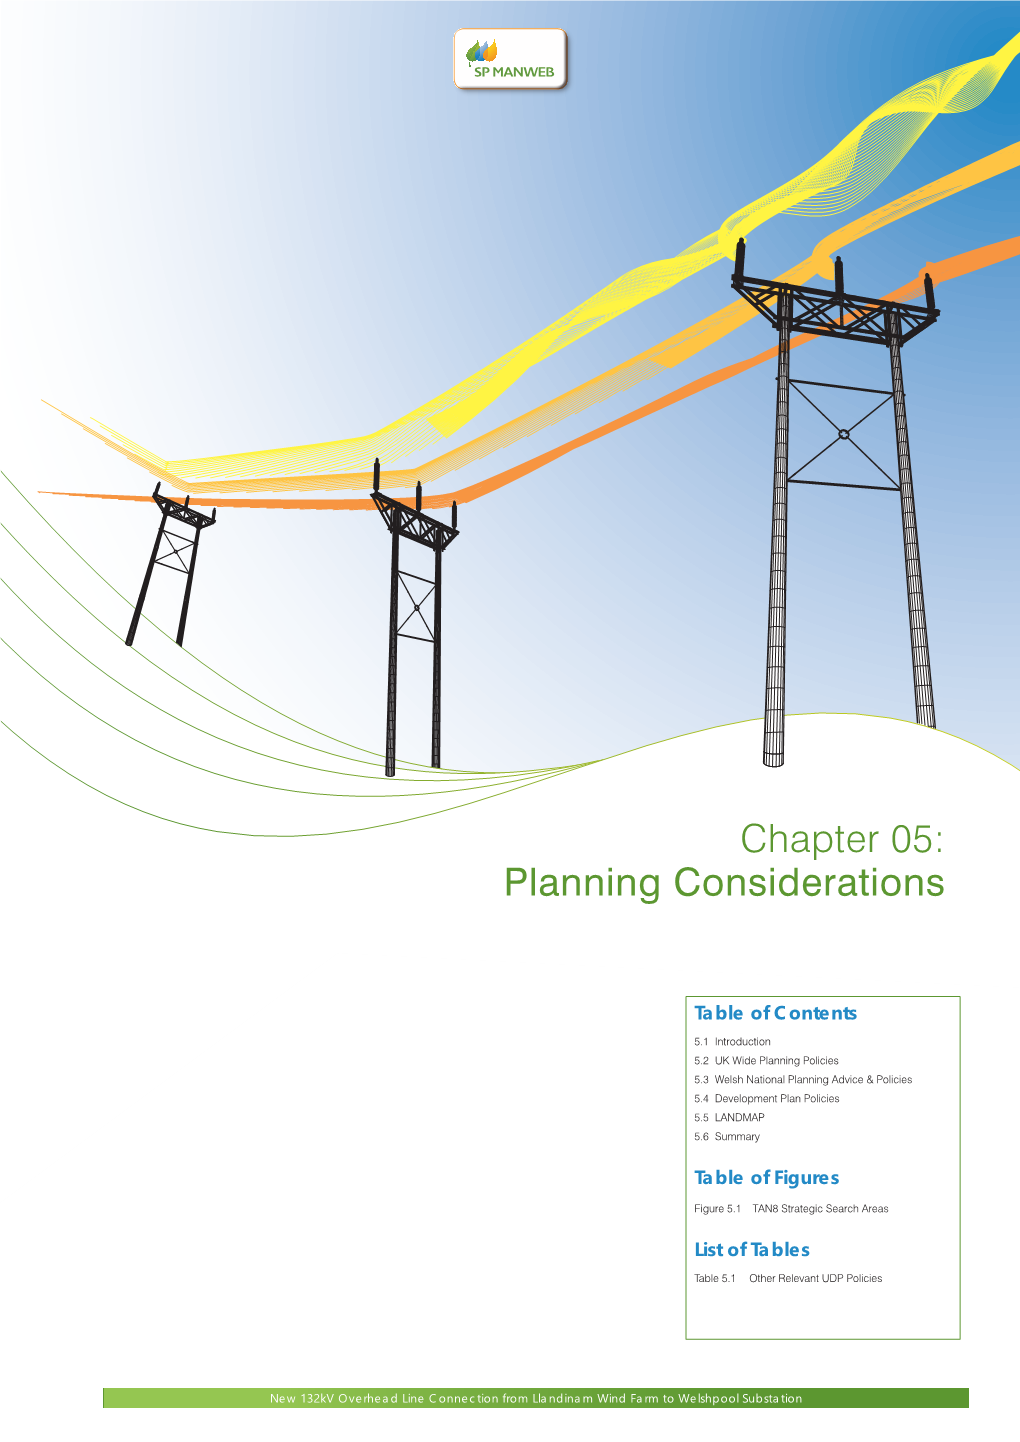 Chapter 05: Planning Considerations